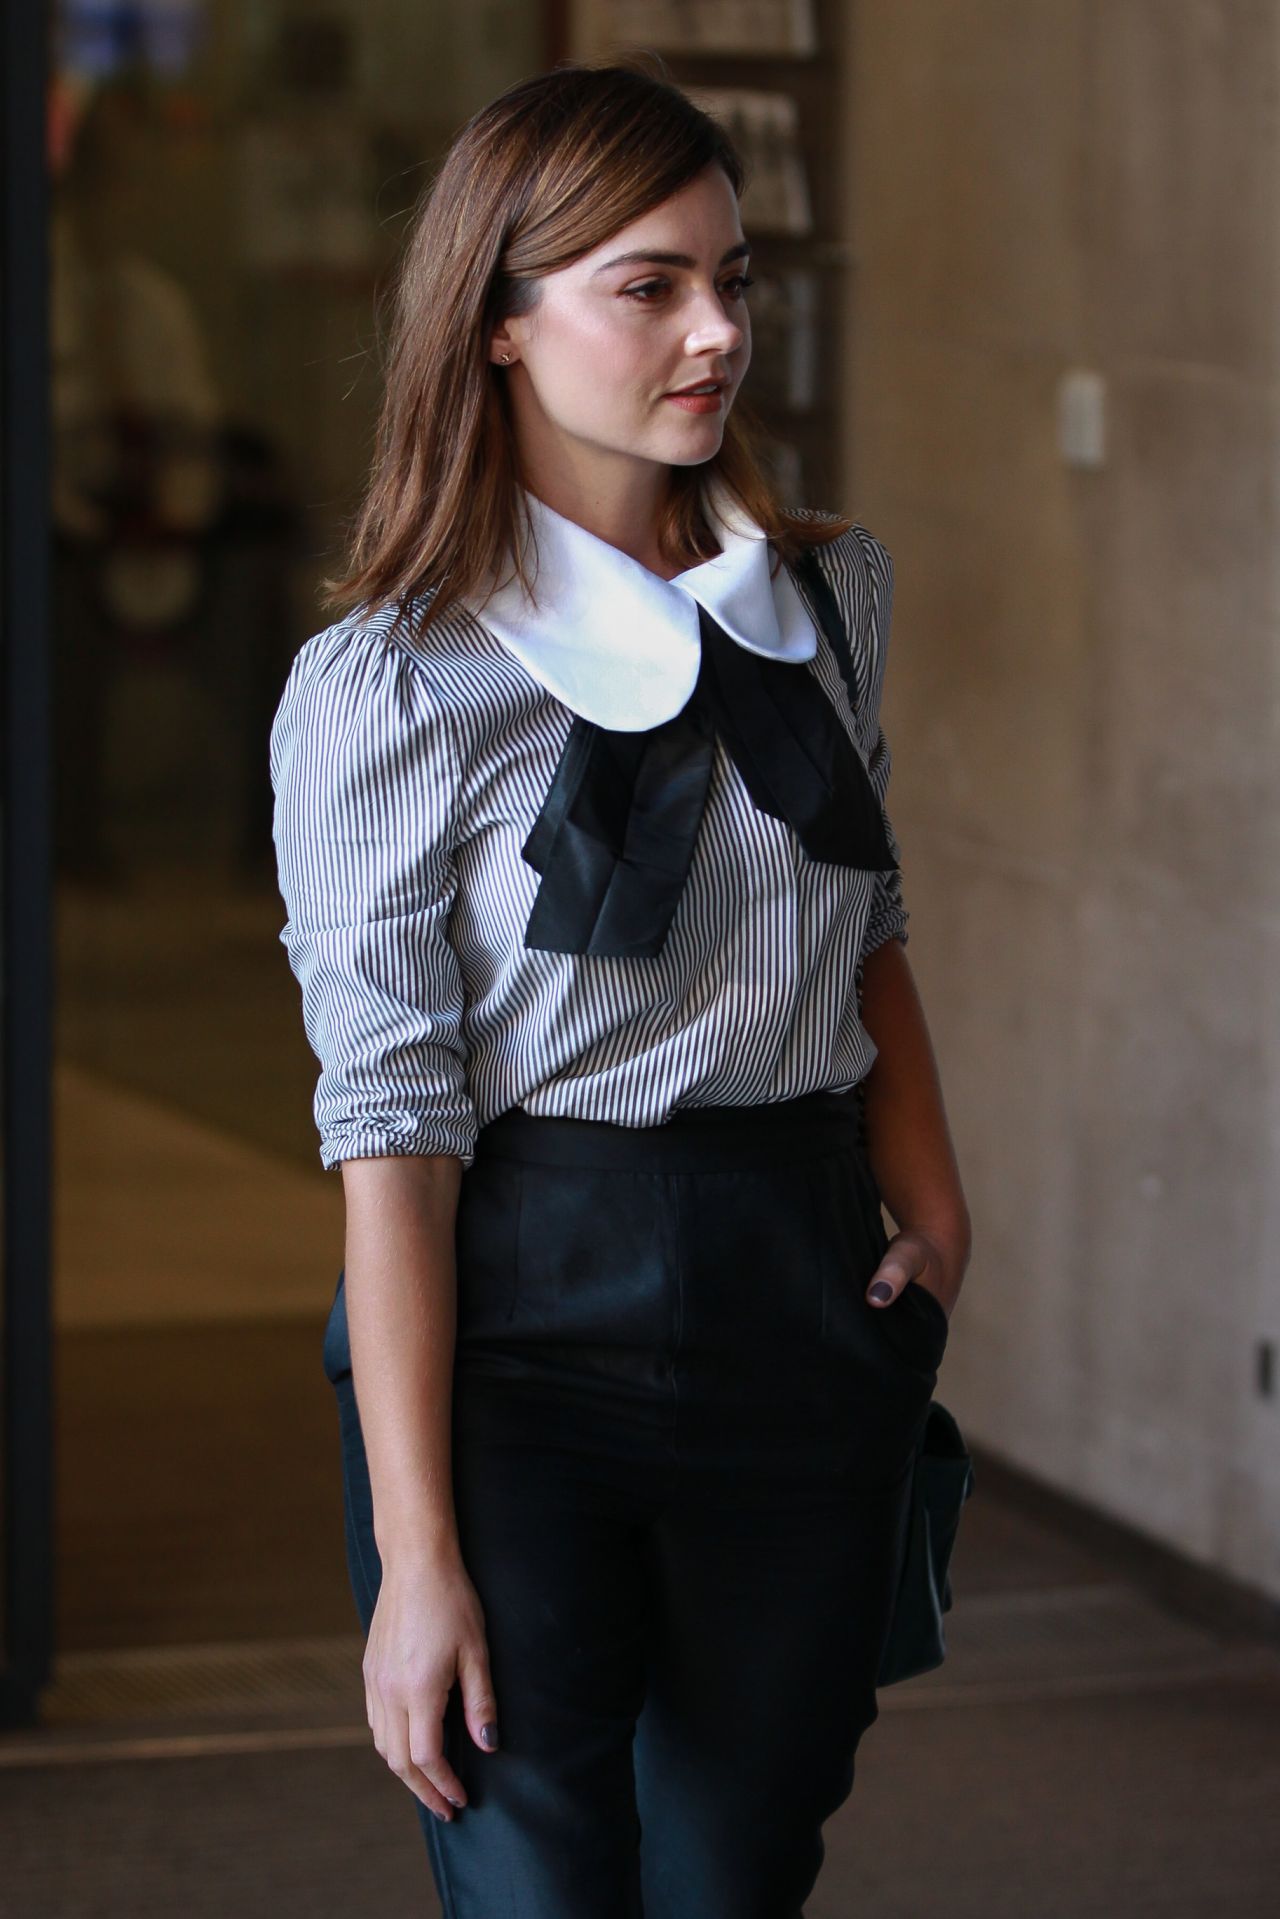 Jenna Coleman at BBC Broadcasting House in London 8/31/2016.